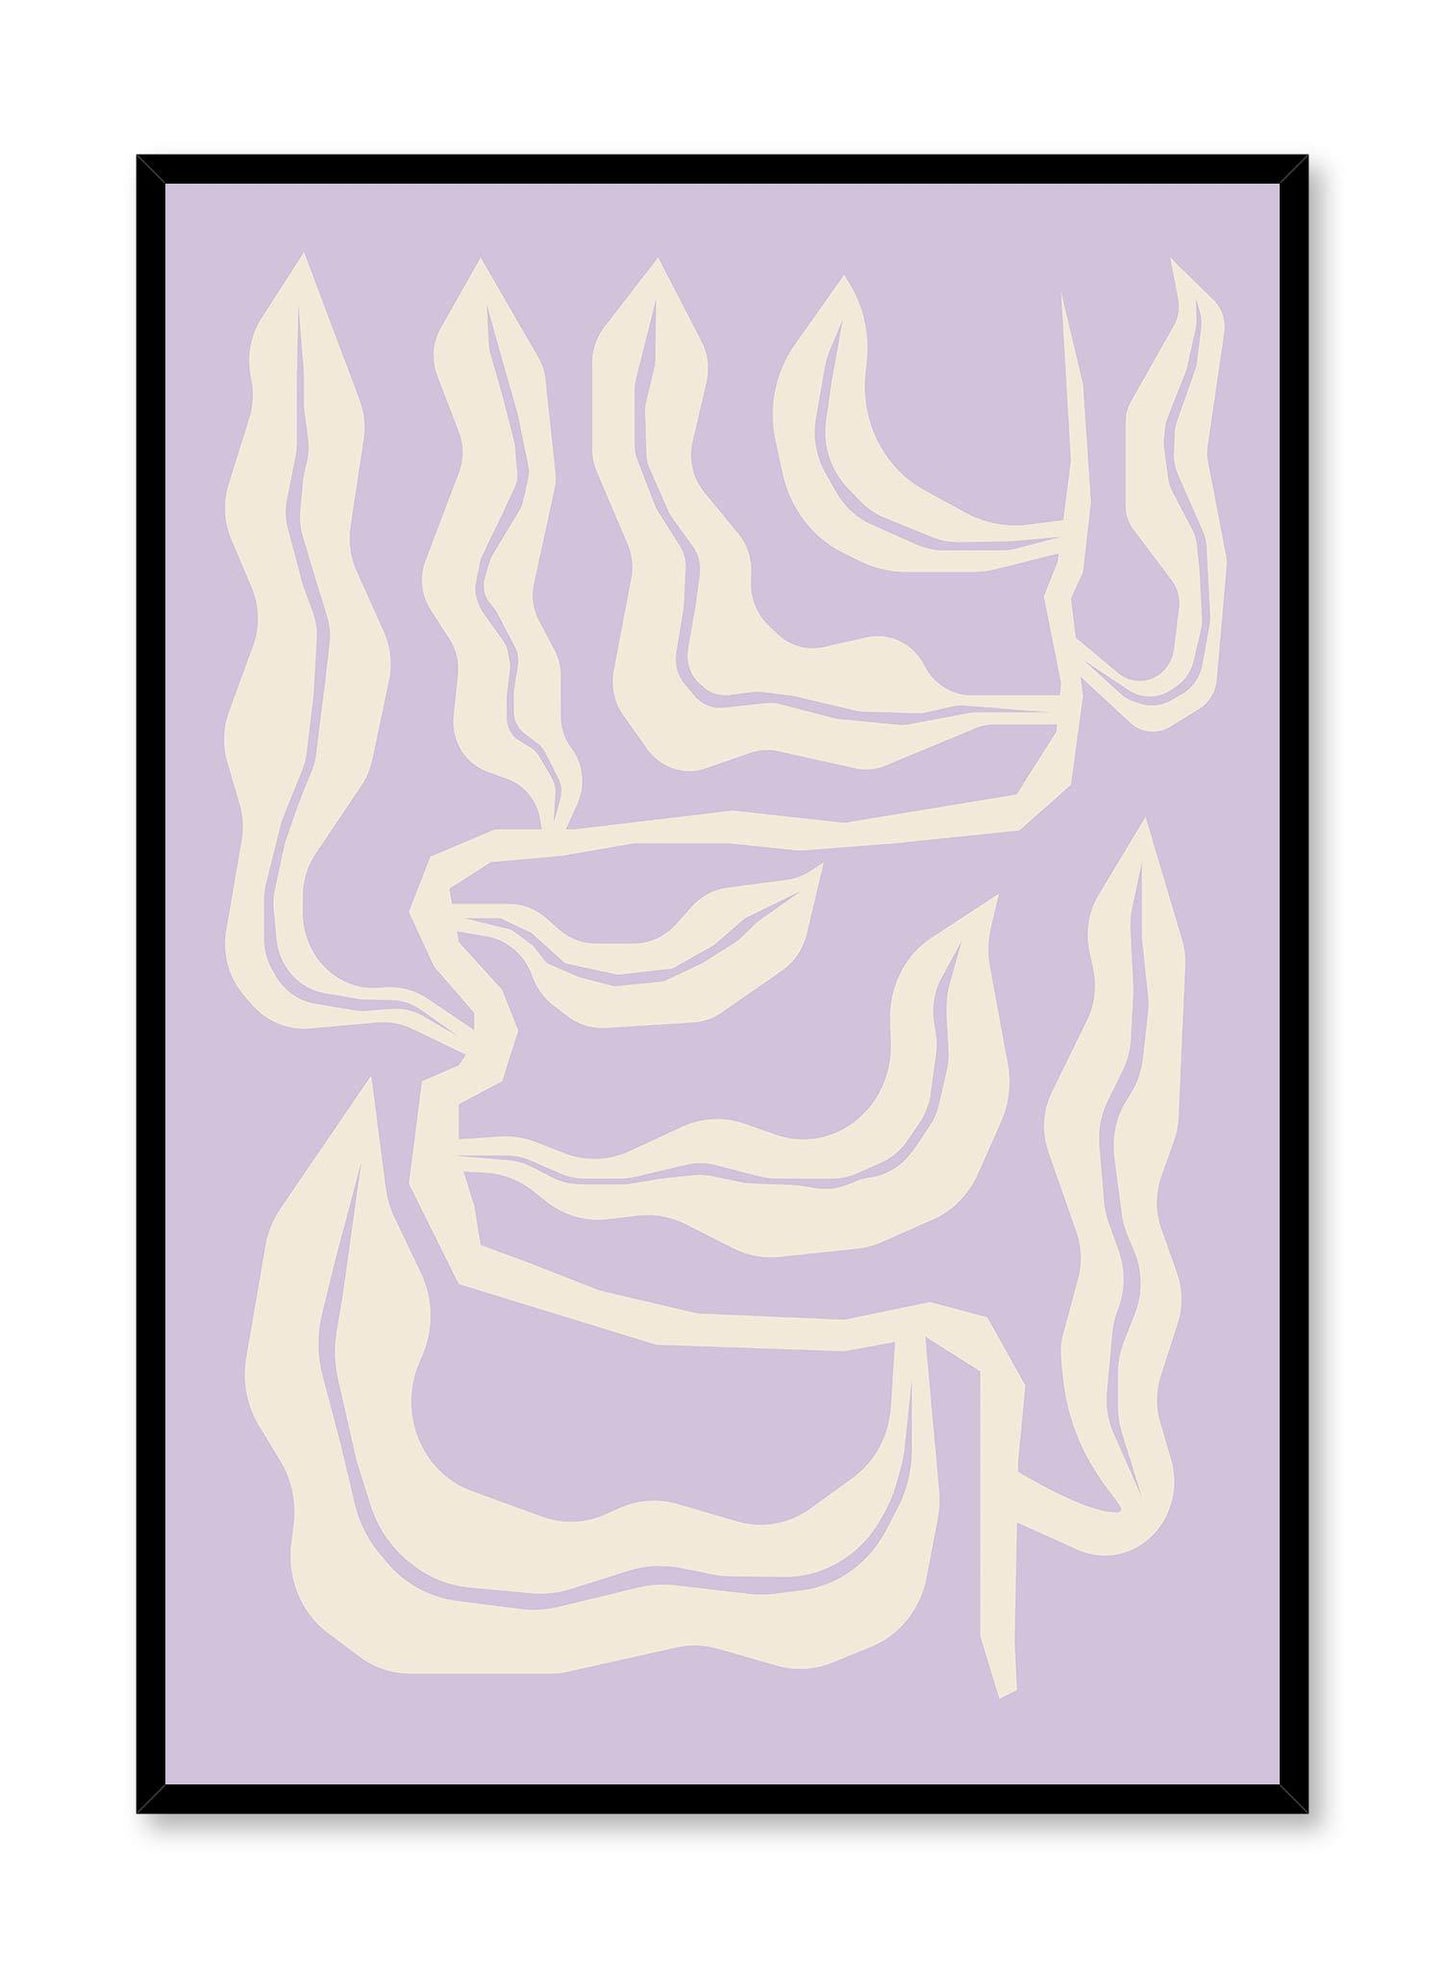 Lavender Lane is a vector abstract illustration of of beige leaves on a lavender background by Opposite Wall.